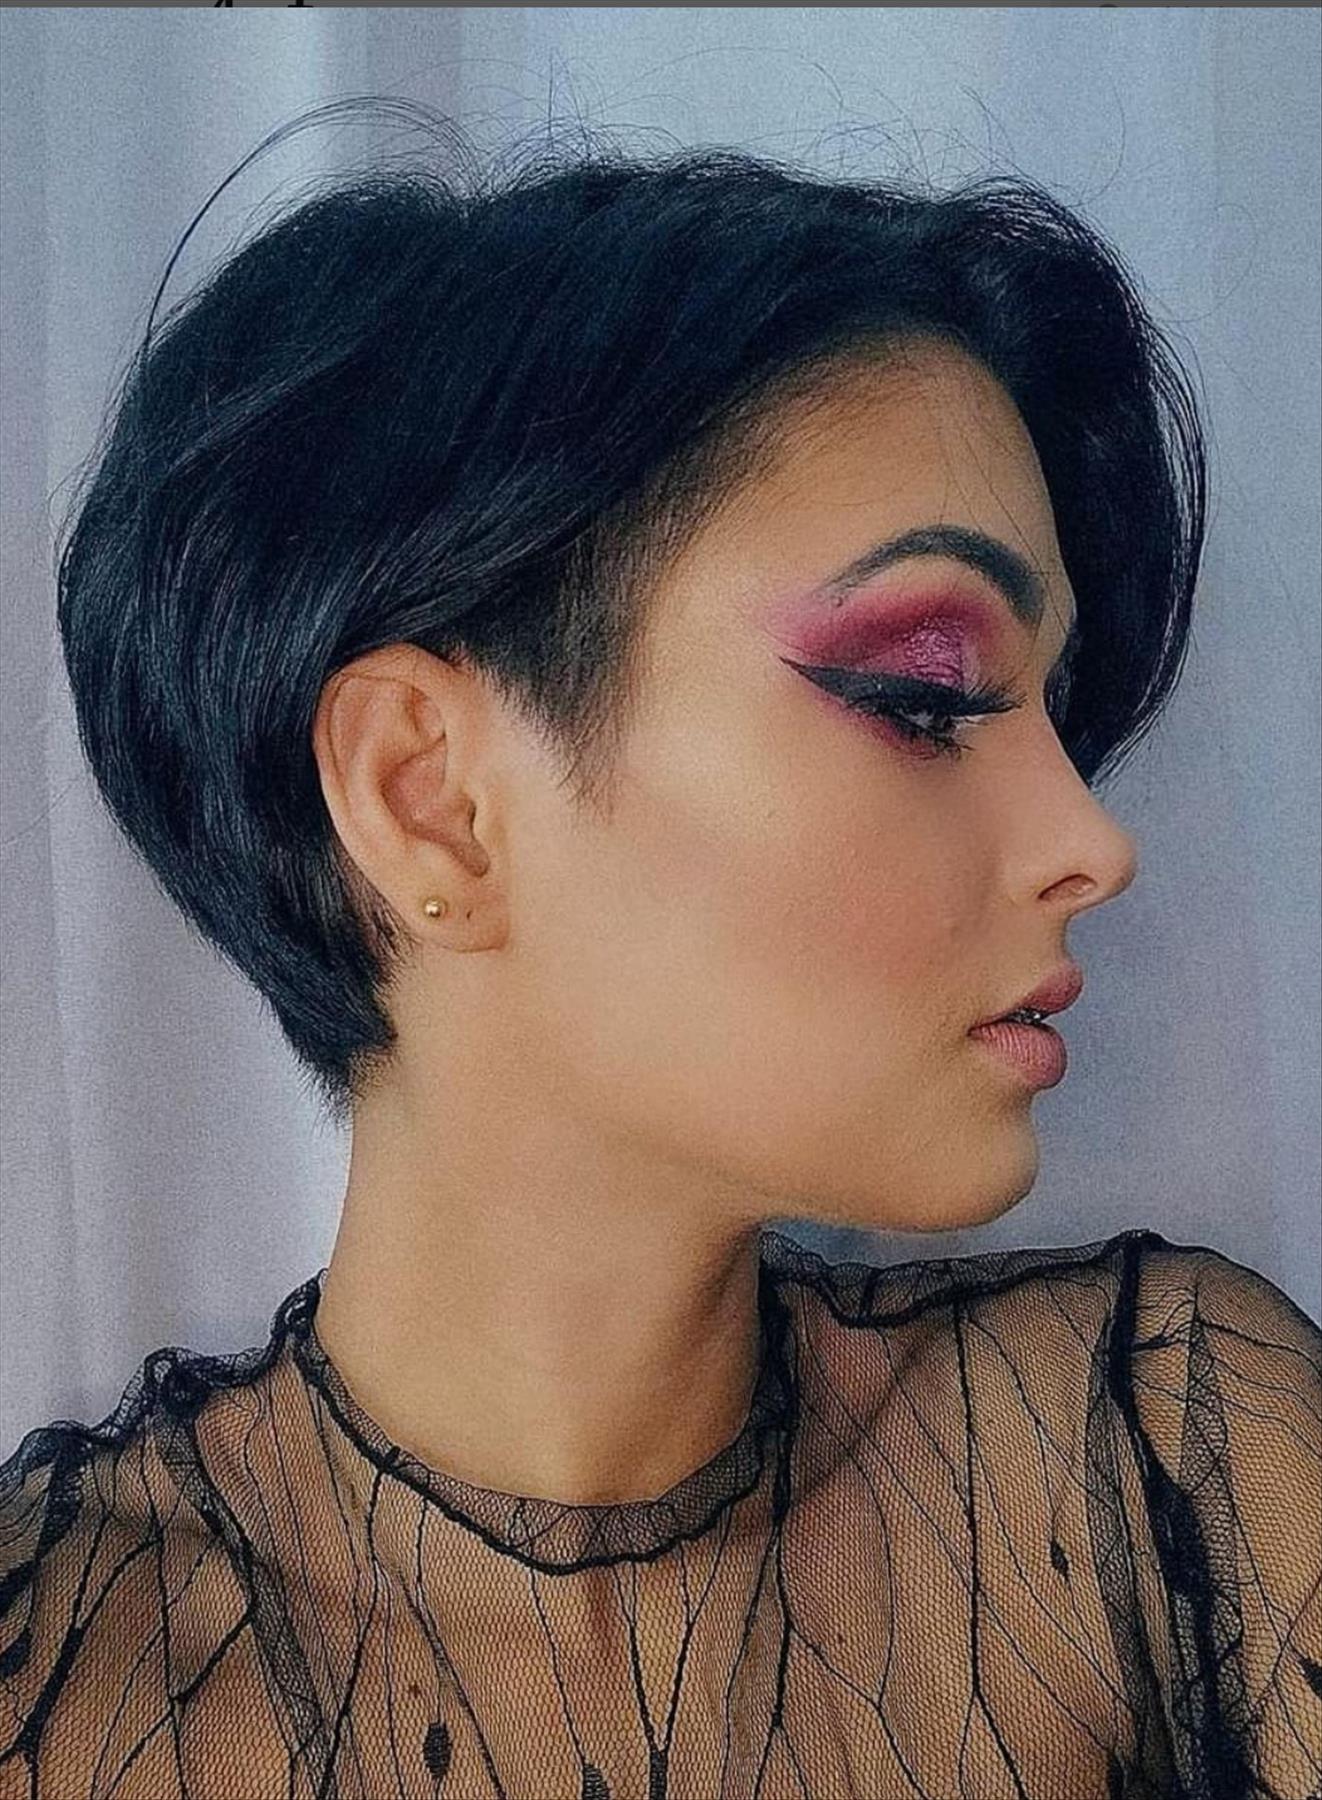 Best Short pixie haircut and hairstyle for cool women